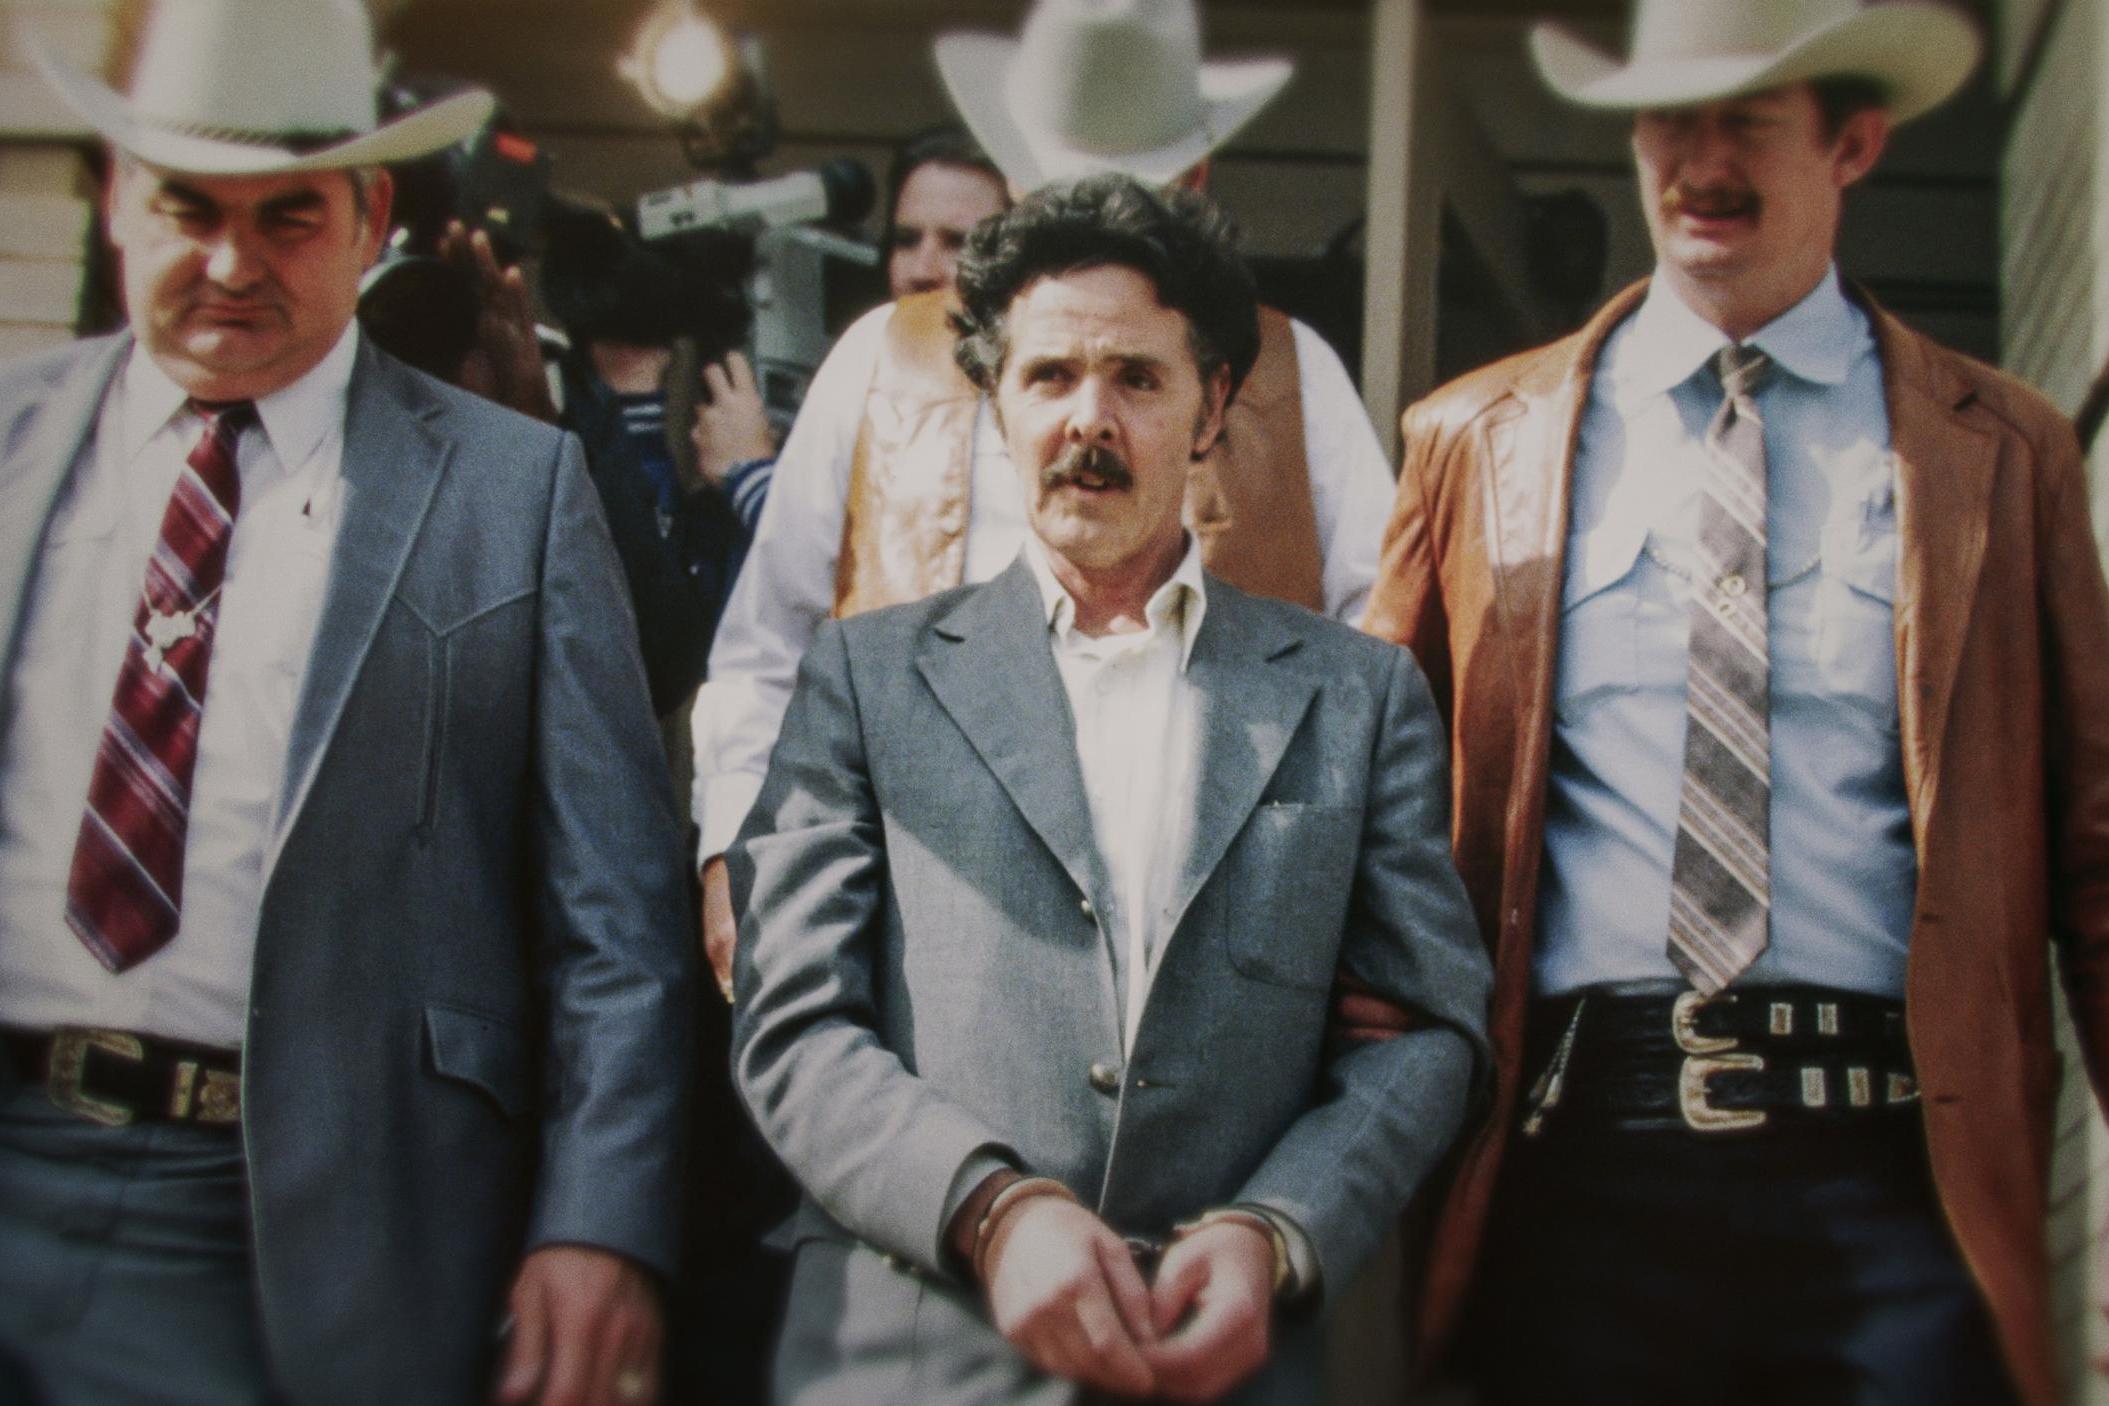 Henry Lee Lucas (centre) is the subject of 'The Confession Killer'.